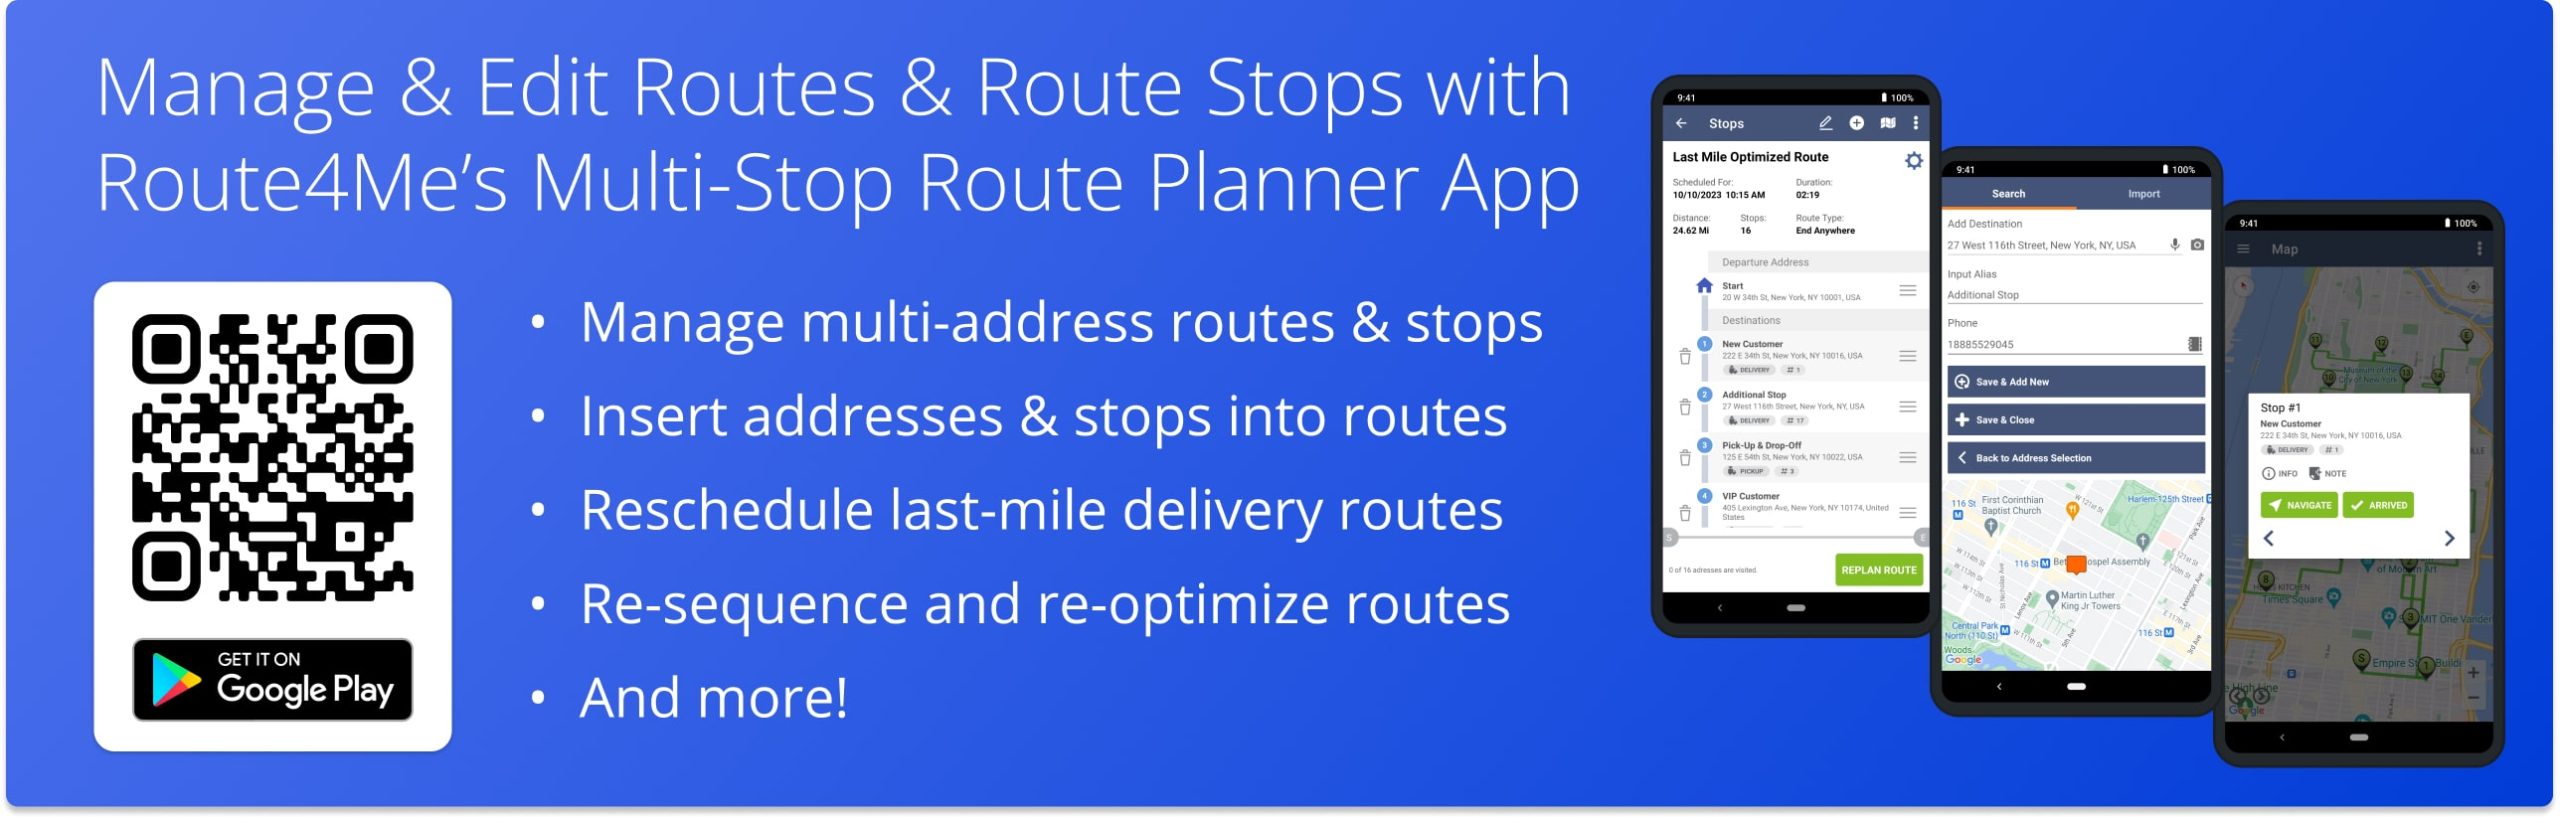 Managing last-mile delivery routes and editing route stops on Route4Me's Android route planner app for drivers.